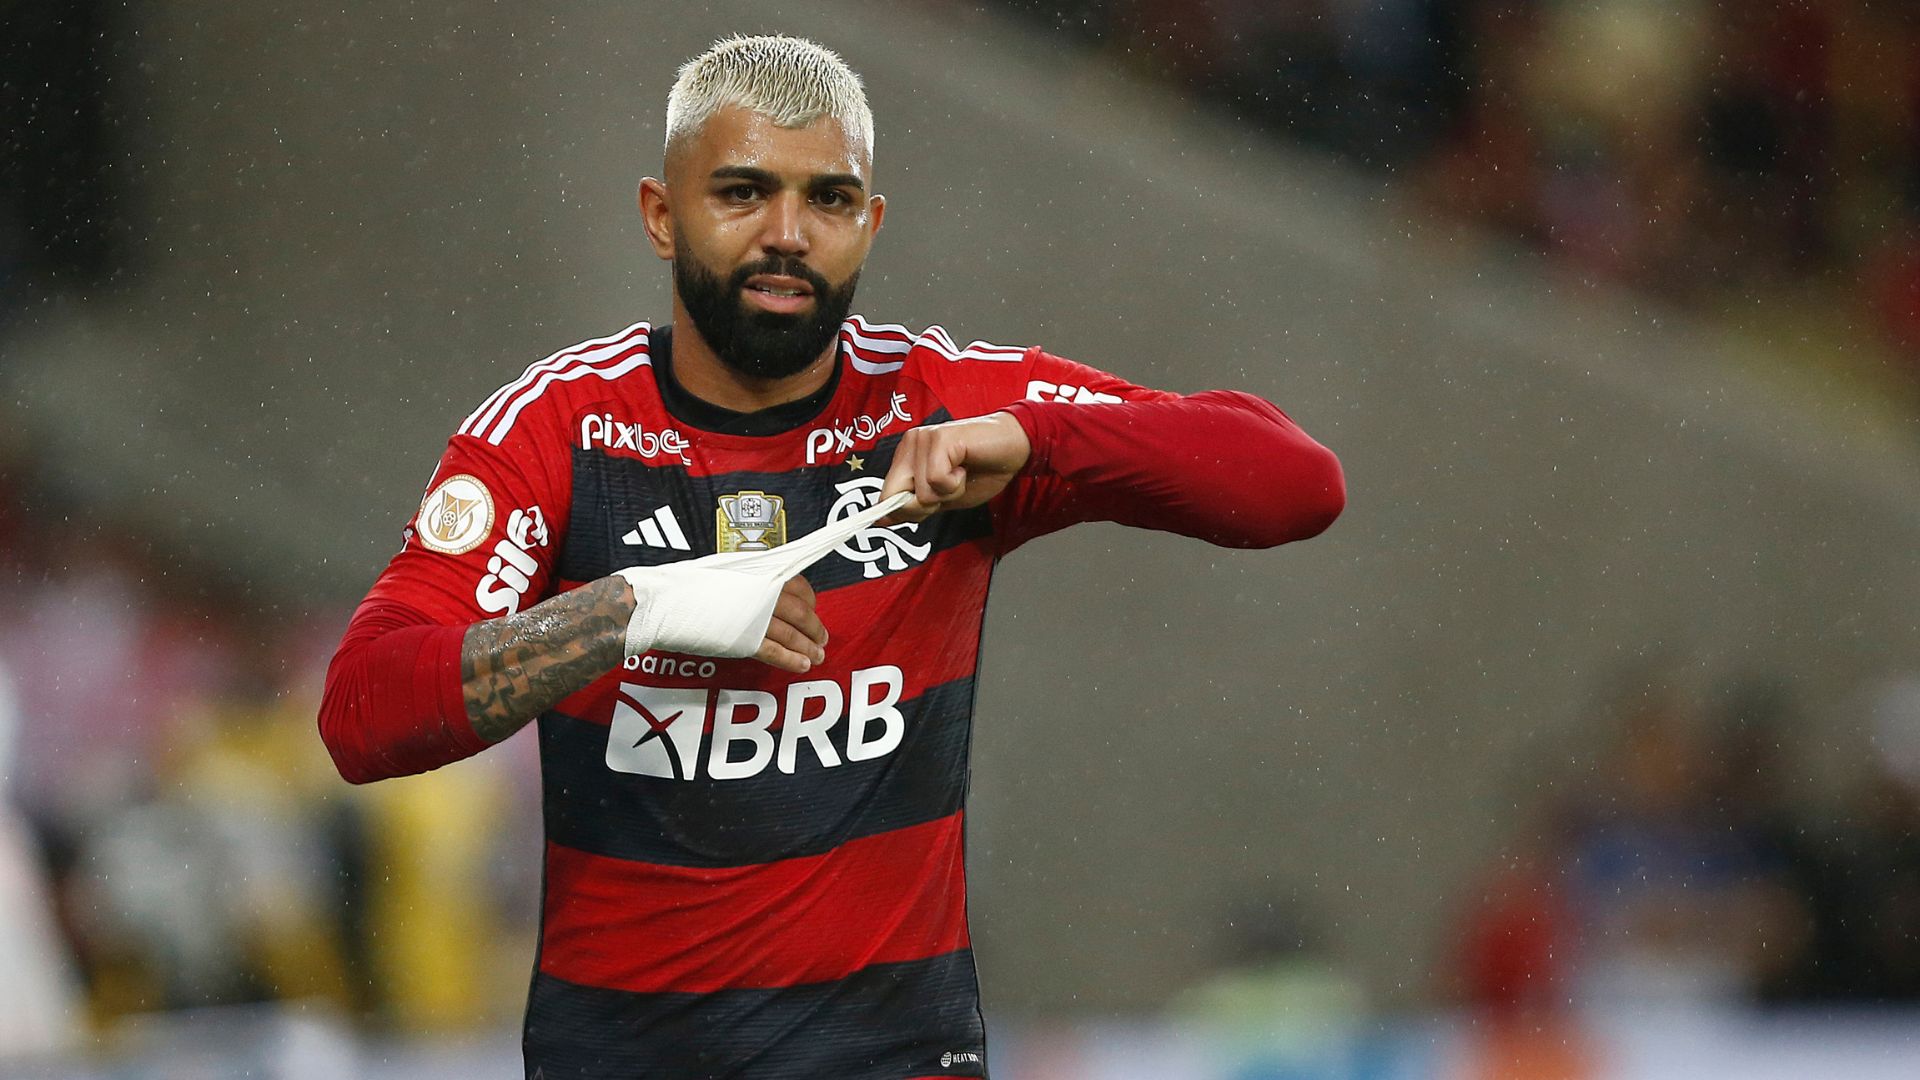 Gabigol can appeal to overturn suspension (Credit: Getty Images)